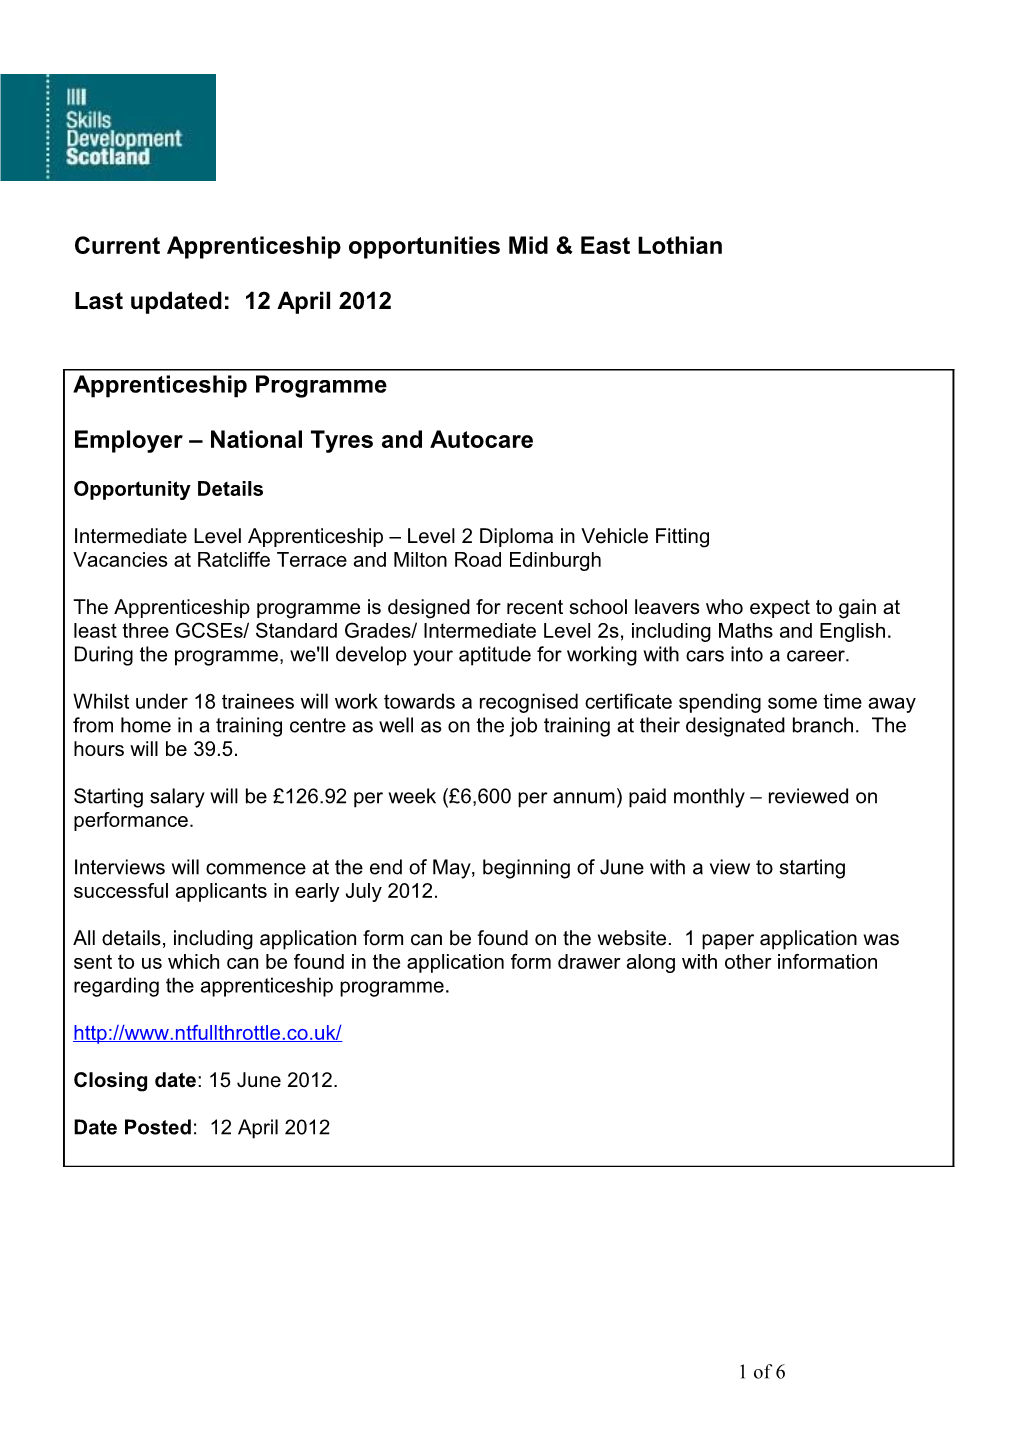 Current Apprenticeship Opportunities Mid & East Lothian